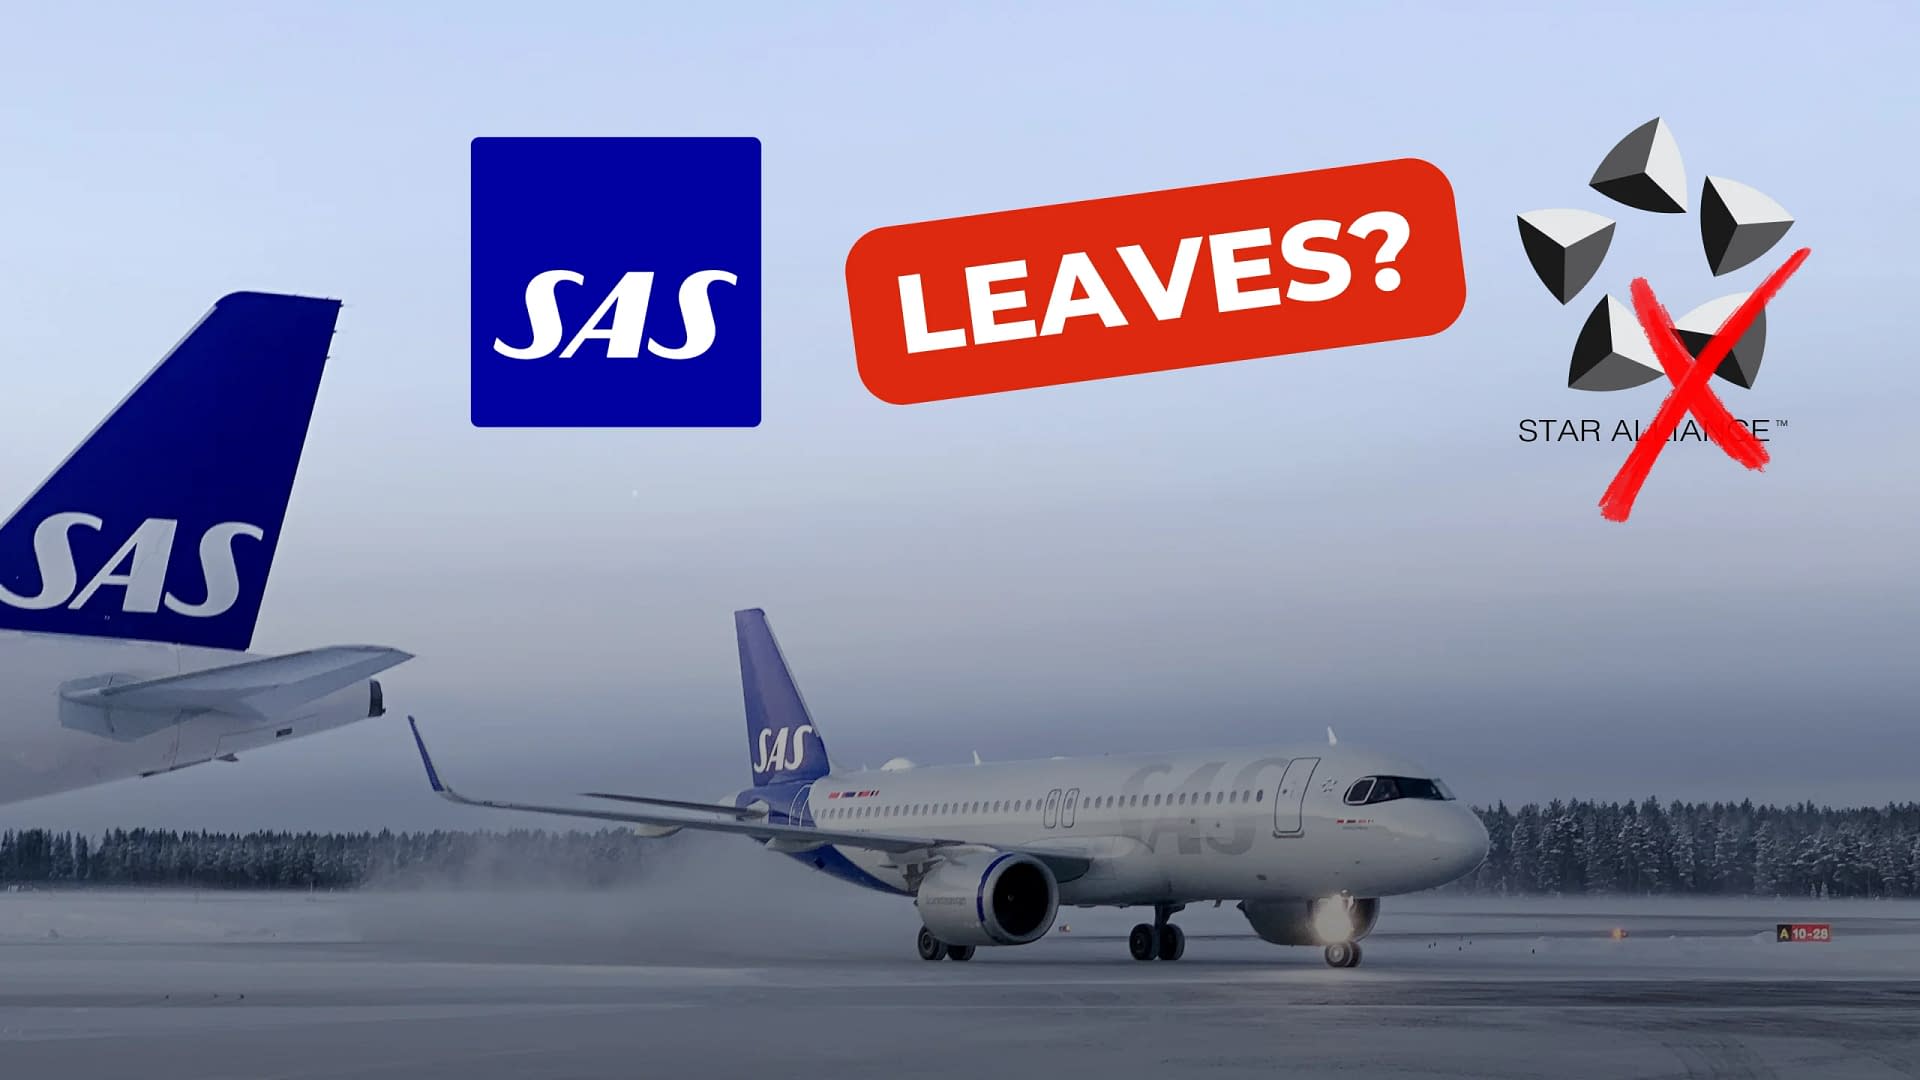 SAS Will Leave Star Alliance and join SkyTeam after being acquired by Air France-KLM and others